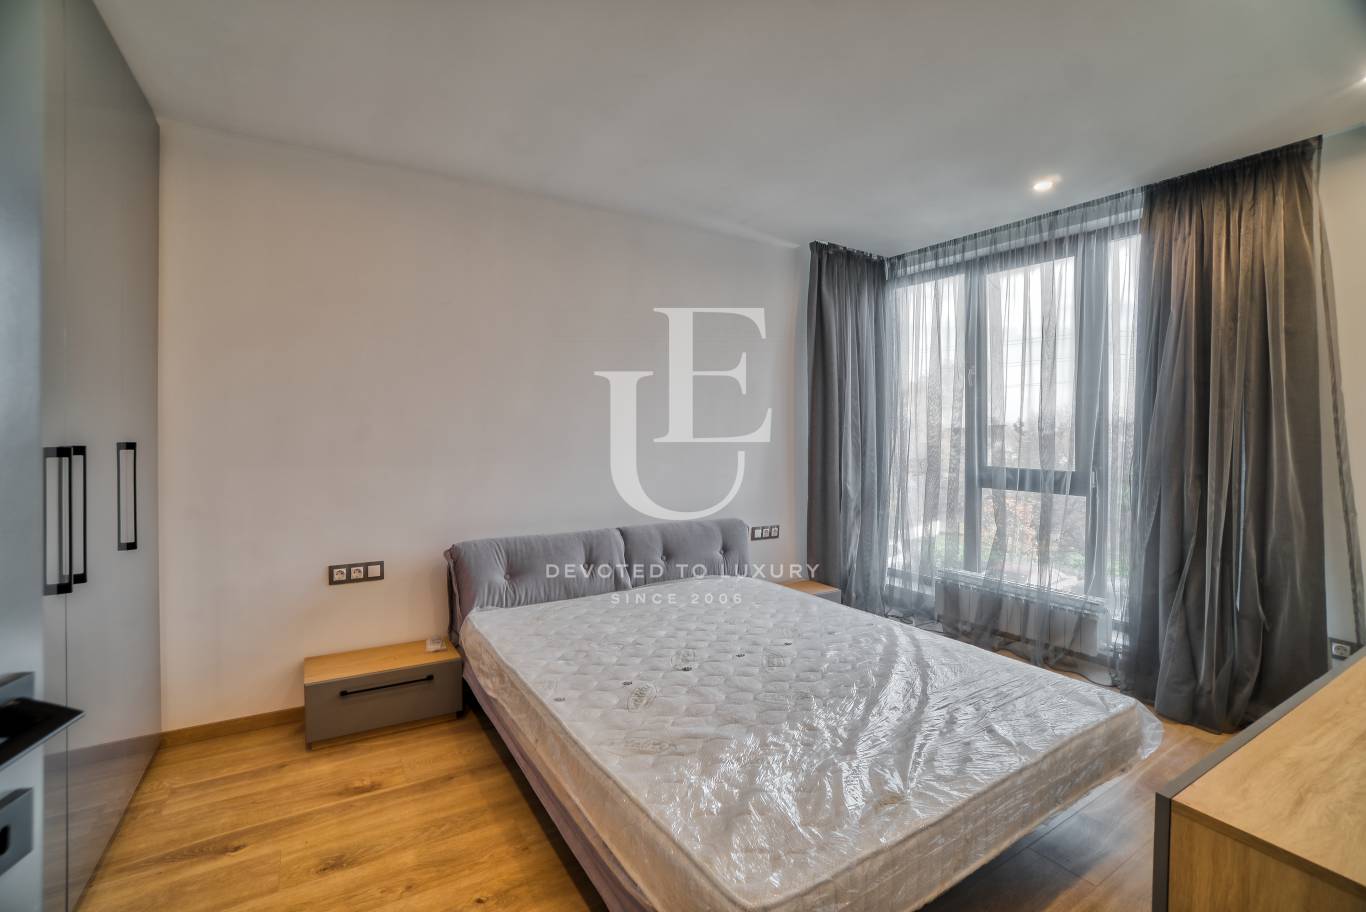 Apartment for rent in Sofia, Boyana with listing ID: K18020 - image 3